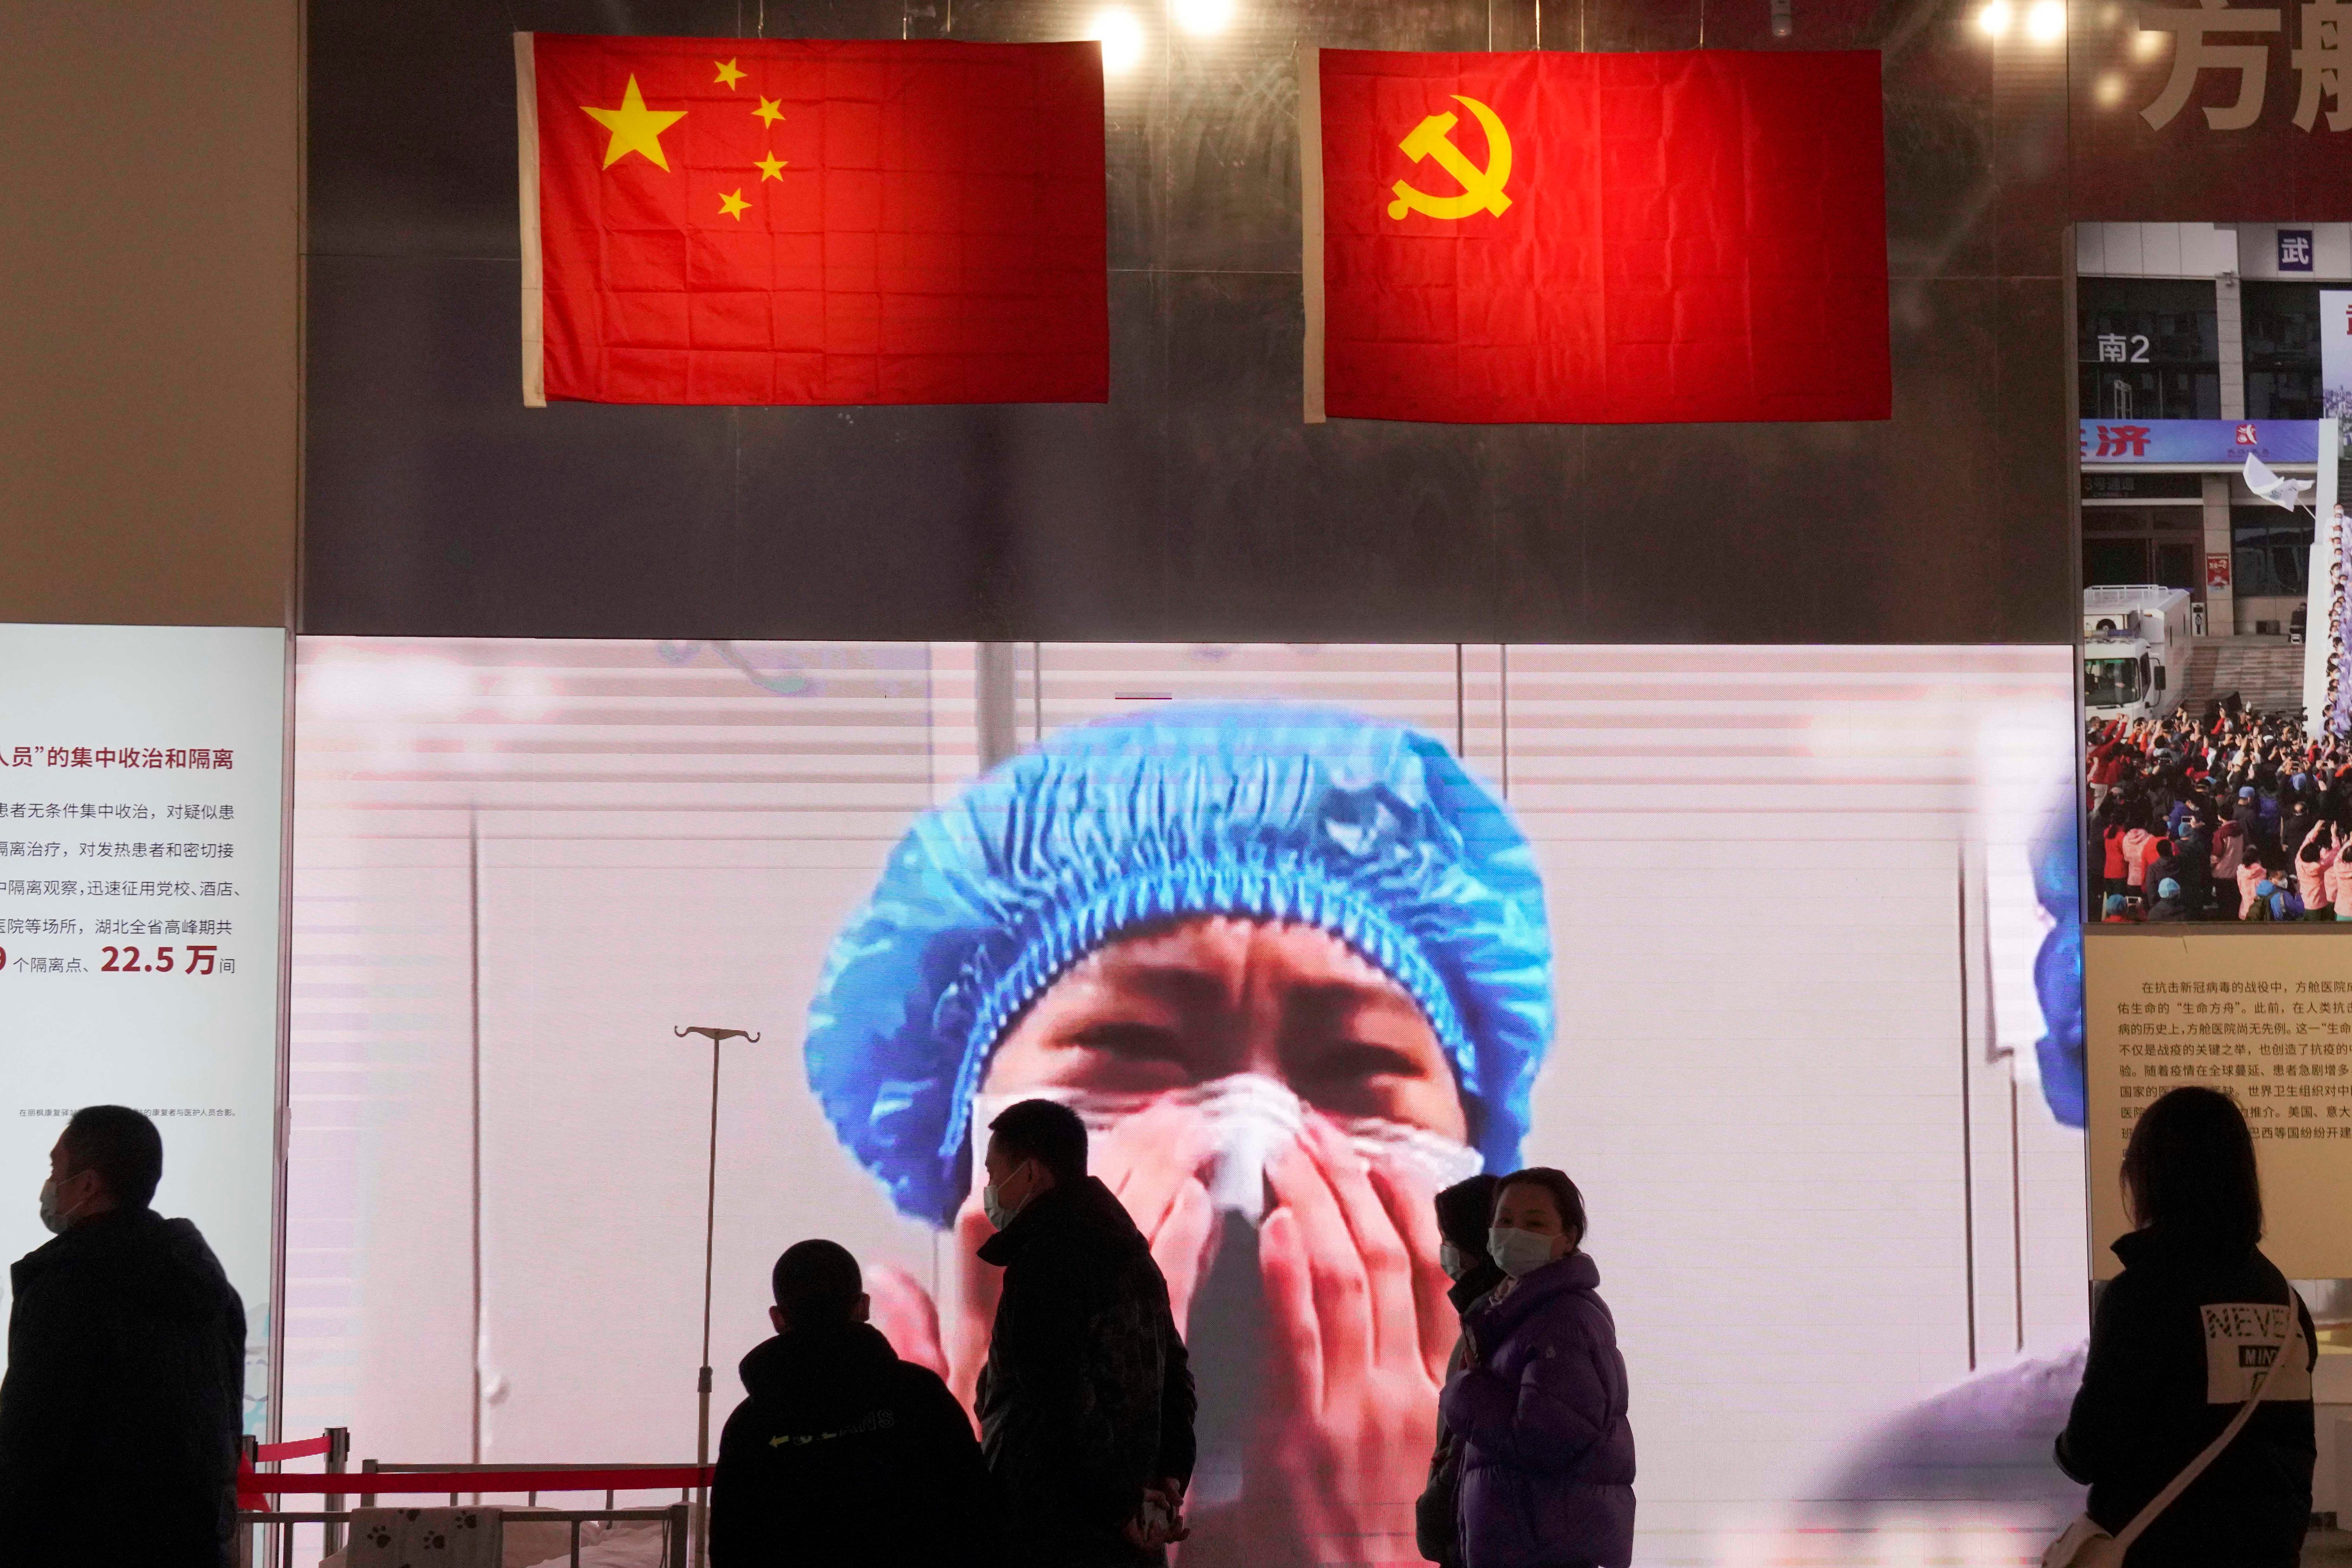 Residents attend an exhibition on the city's fight against the coronavirus in Wuhan